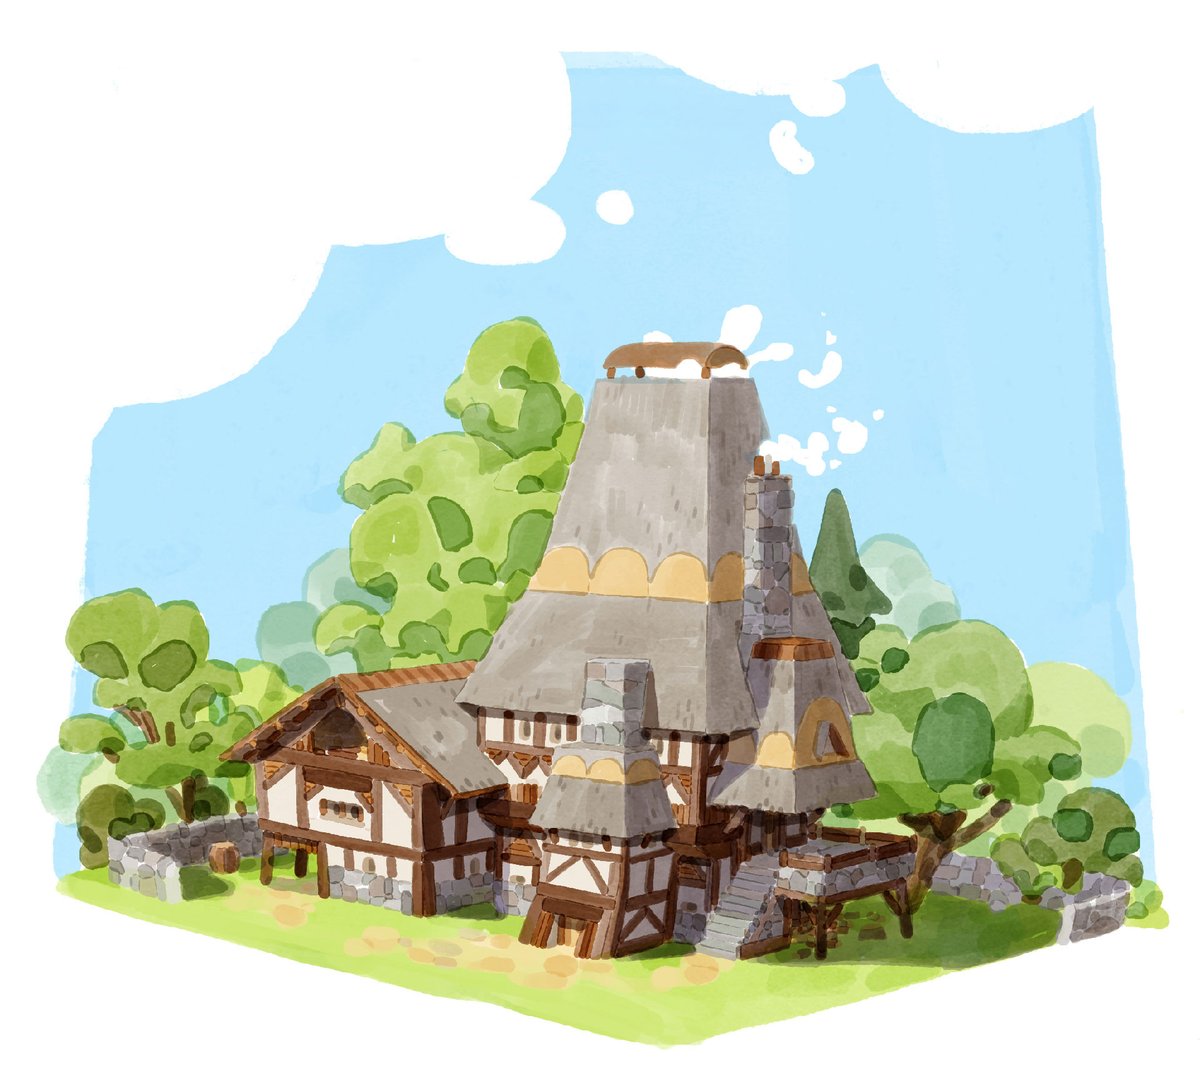 grass no humans outdoors moss rock house scenery  illustration images